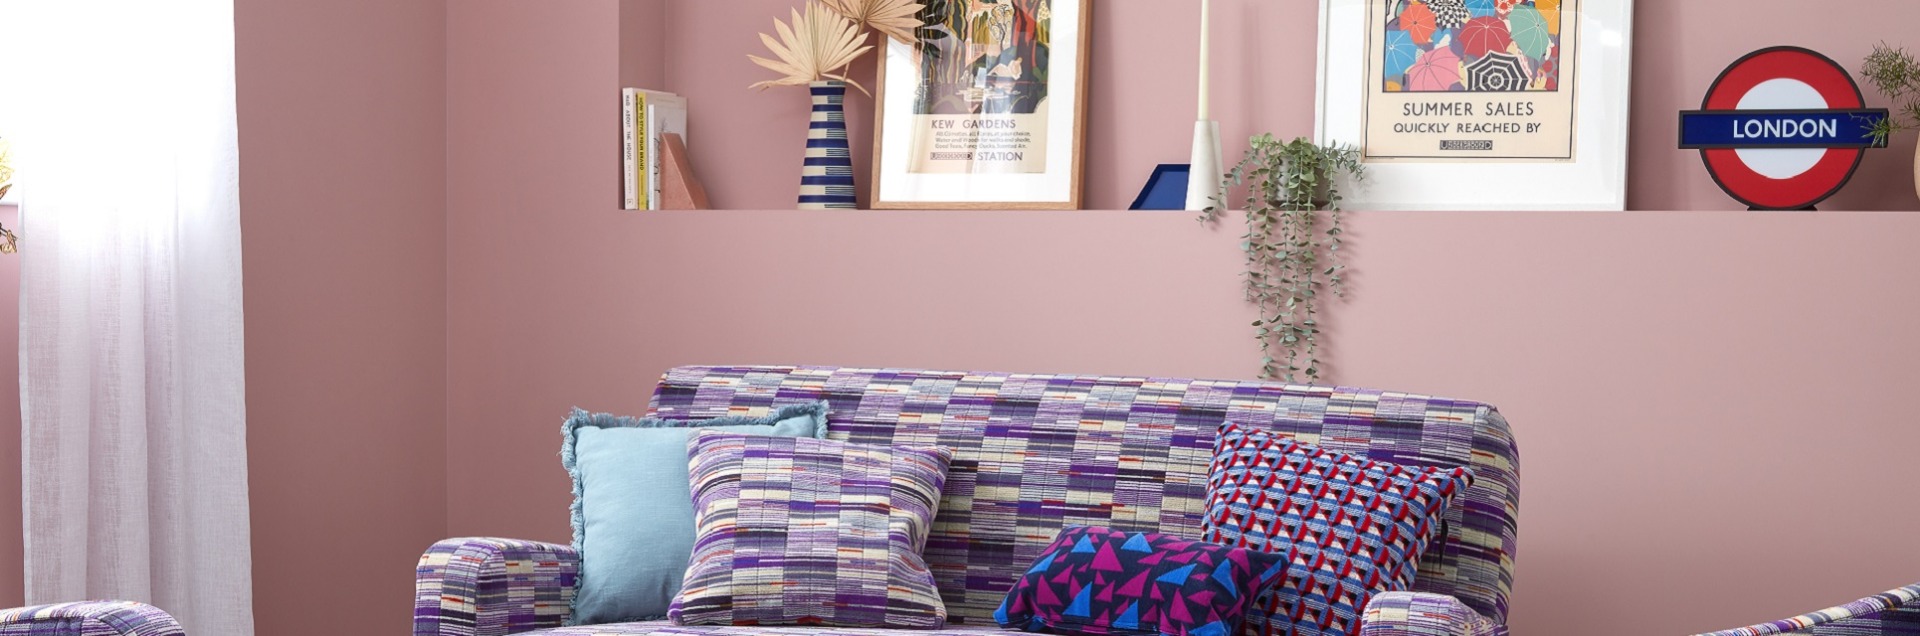 Two framed prints sitting against purple wall with lightbox, with Elizabeth line sofa below featuring scatting of cushions